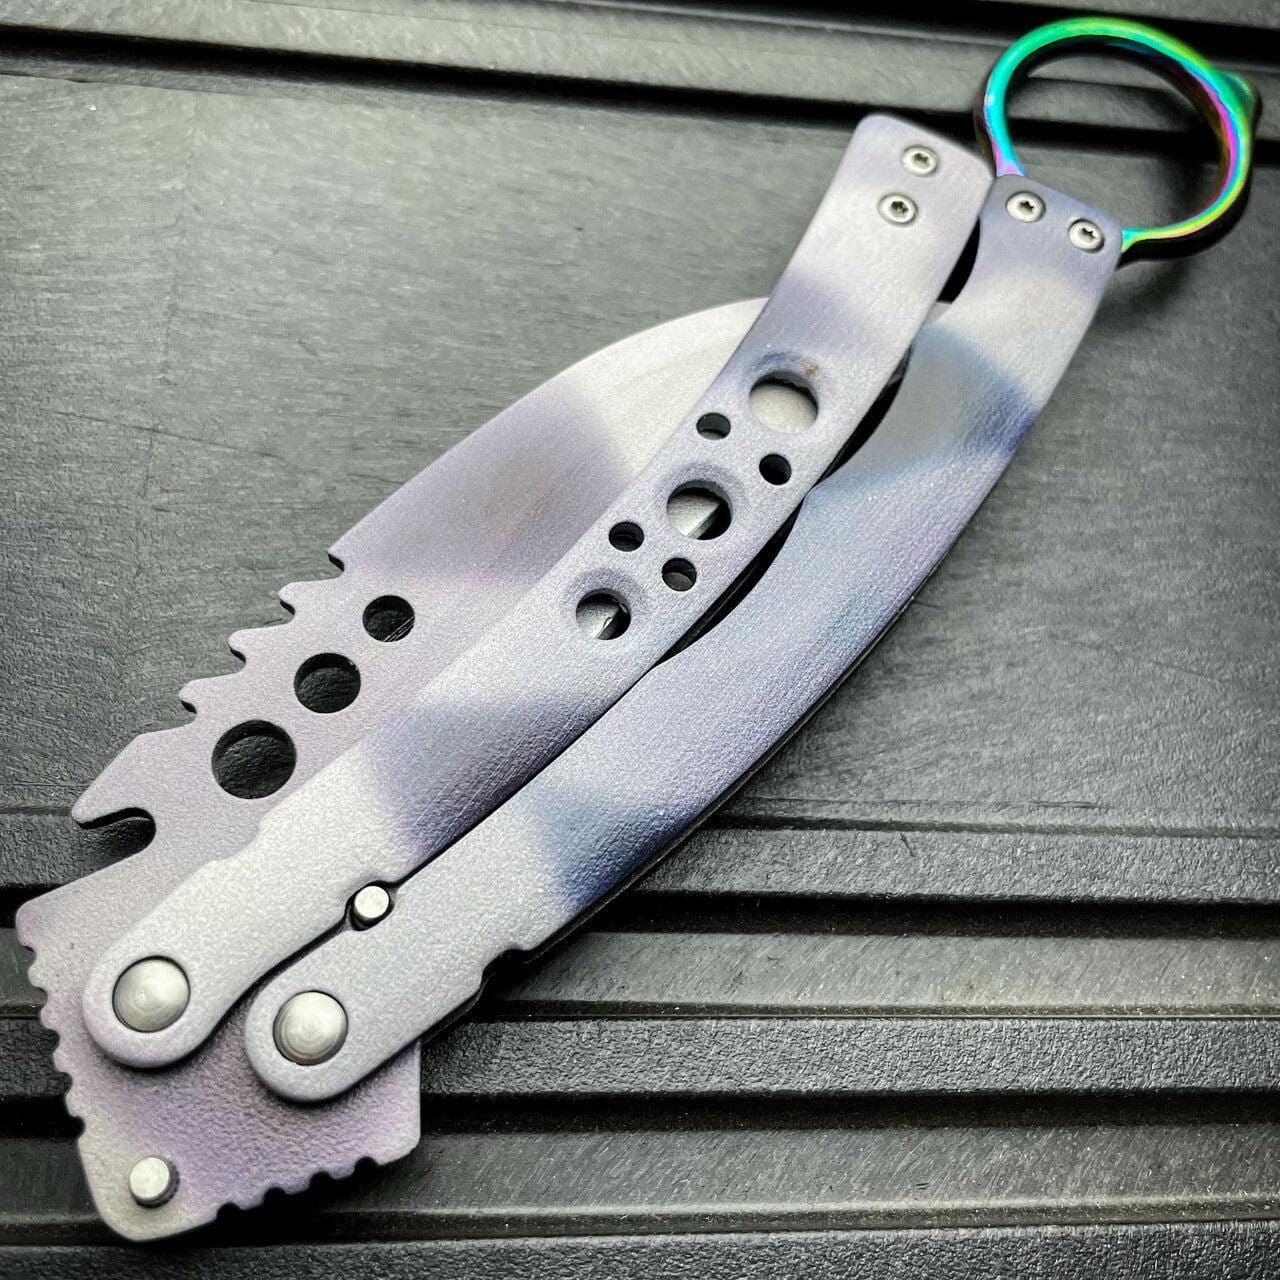 A skin collector bought a rare Karambit knife for $124,000 - only two such  knives exist in